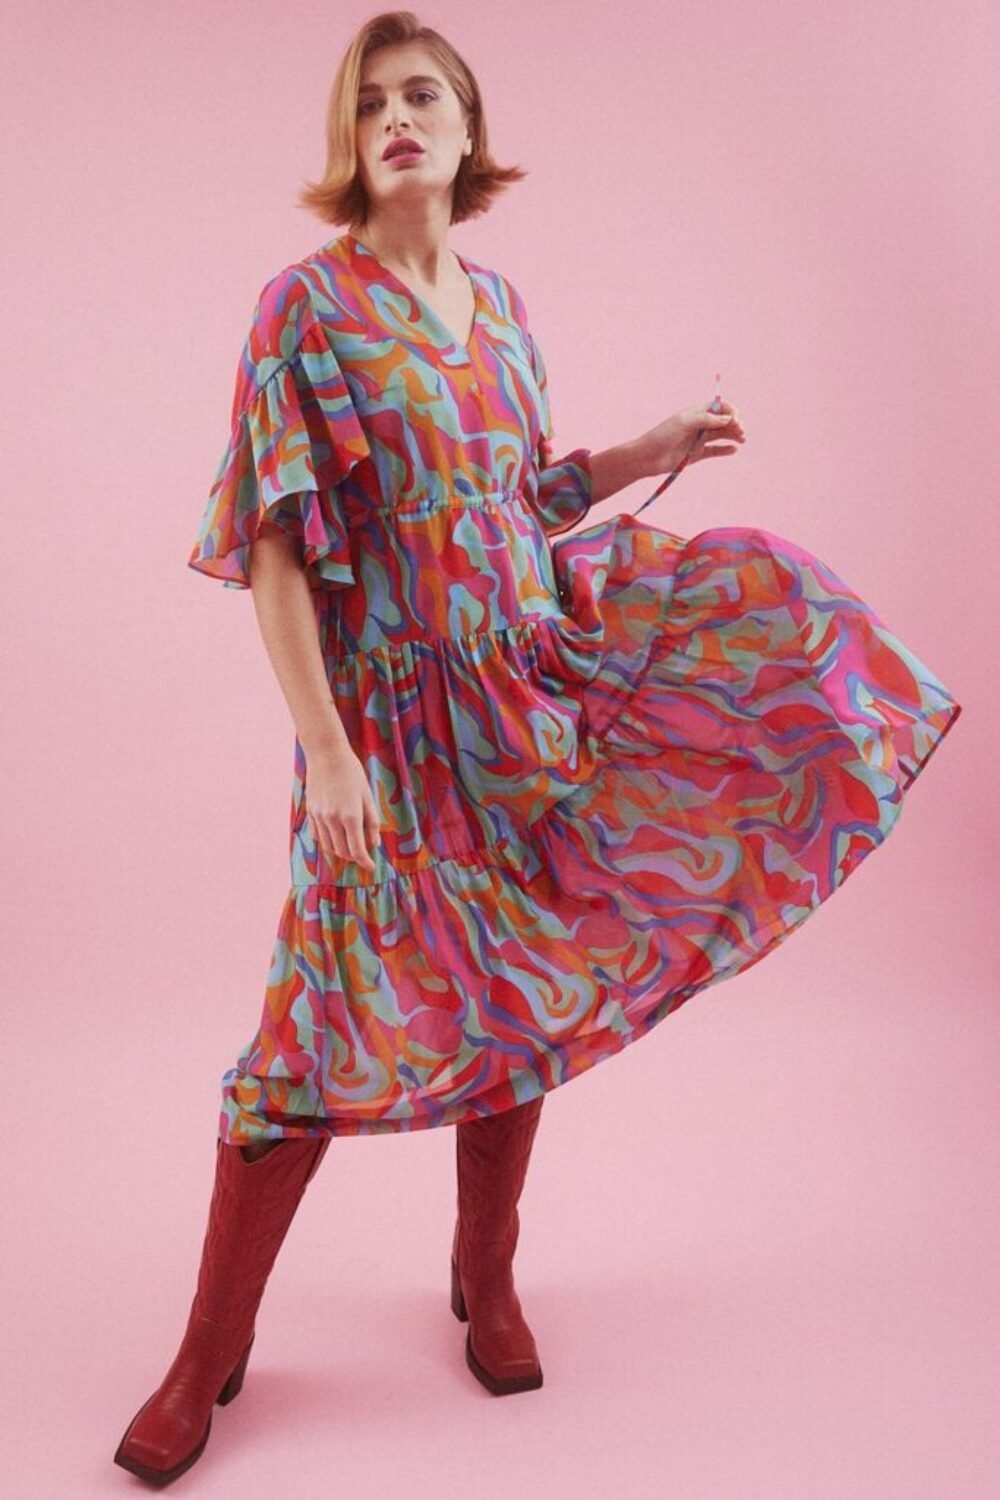 Shop Lux Abstract Pink Midi Dress with Flutter Sleeves and women's luxury and designer clothes at www.lux-apparel.co.uk